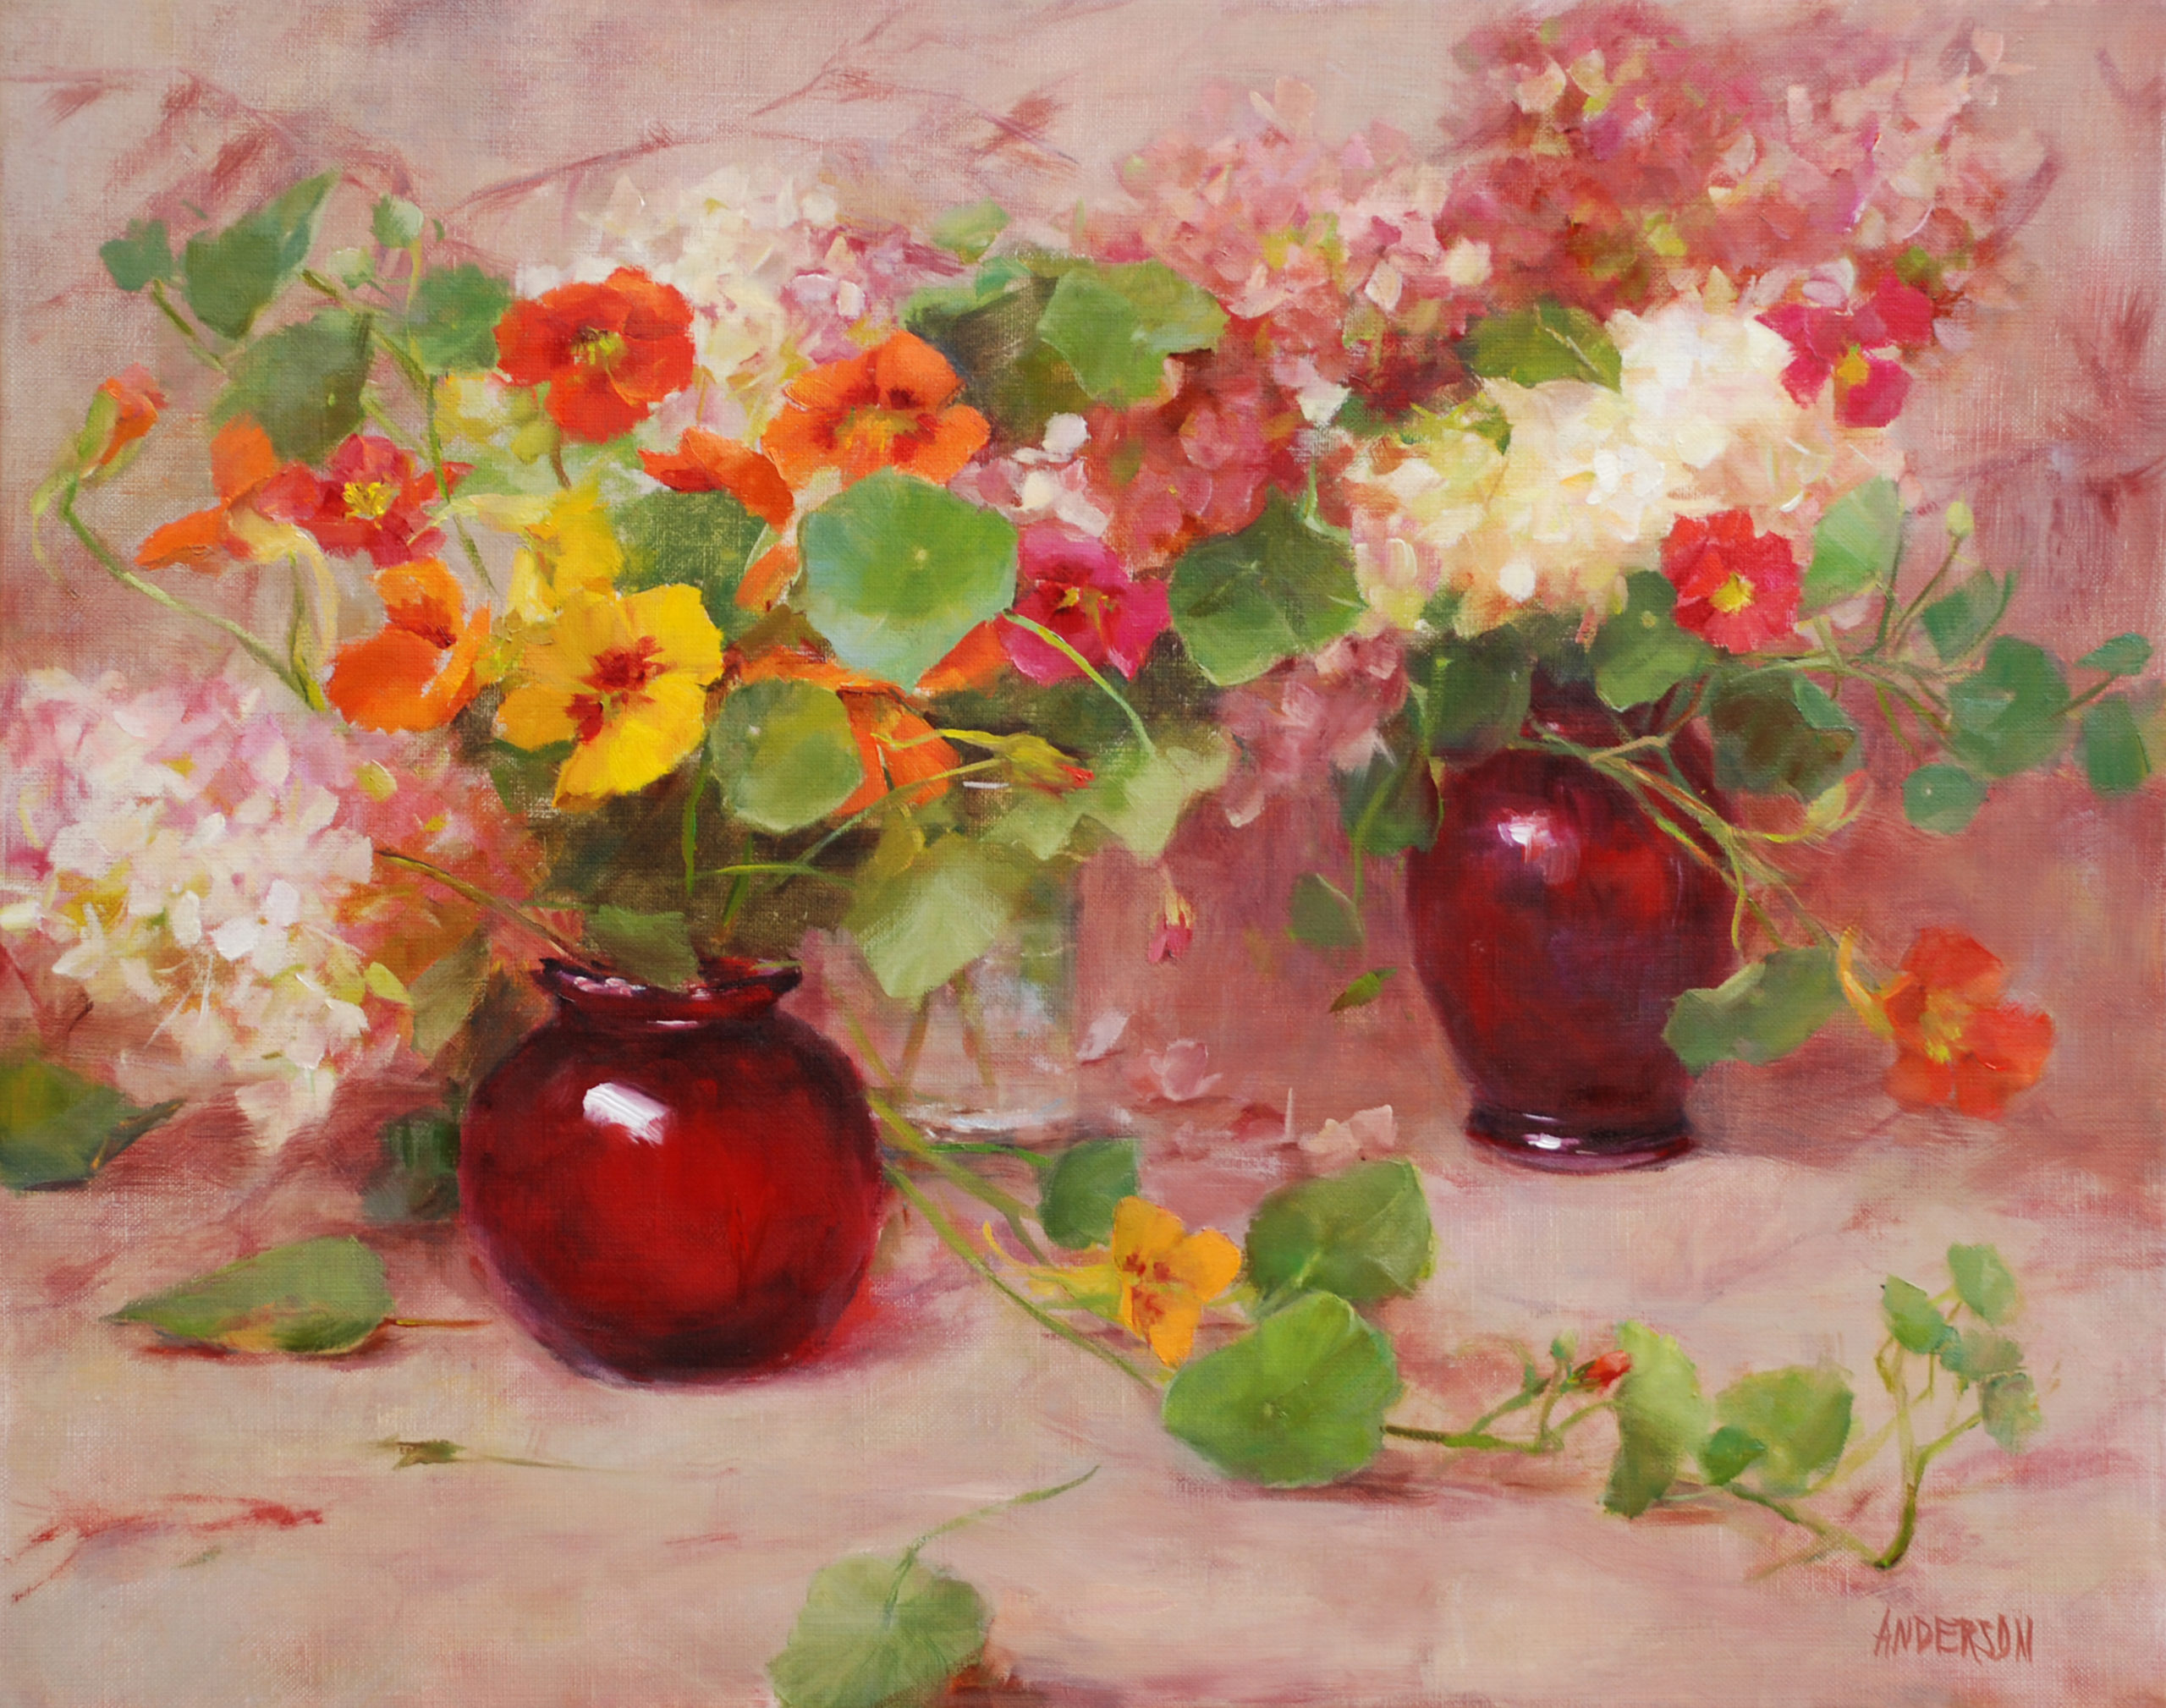 Kathy Anderson, “Ruby and Nasturtium,” oil on canvas